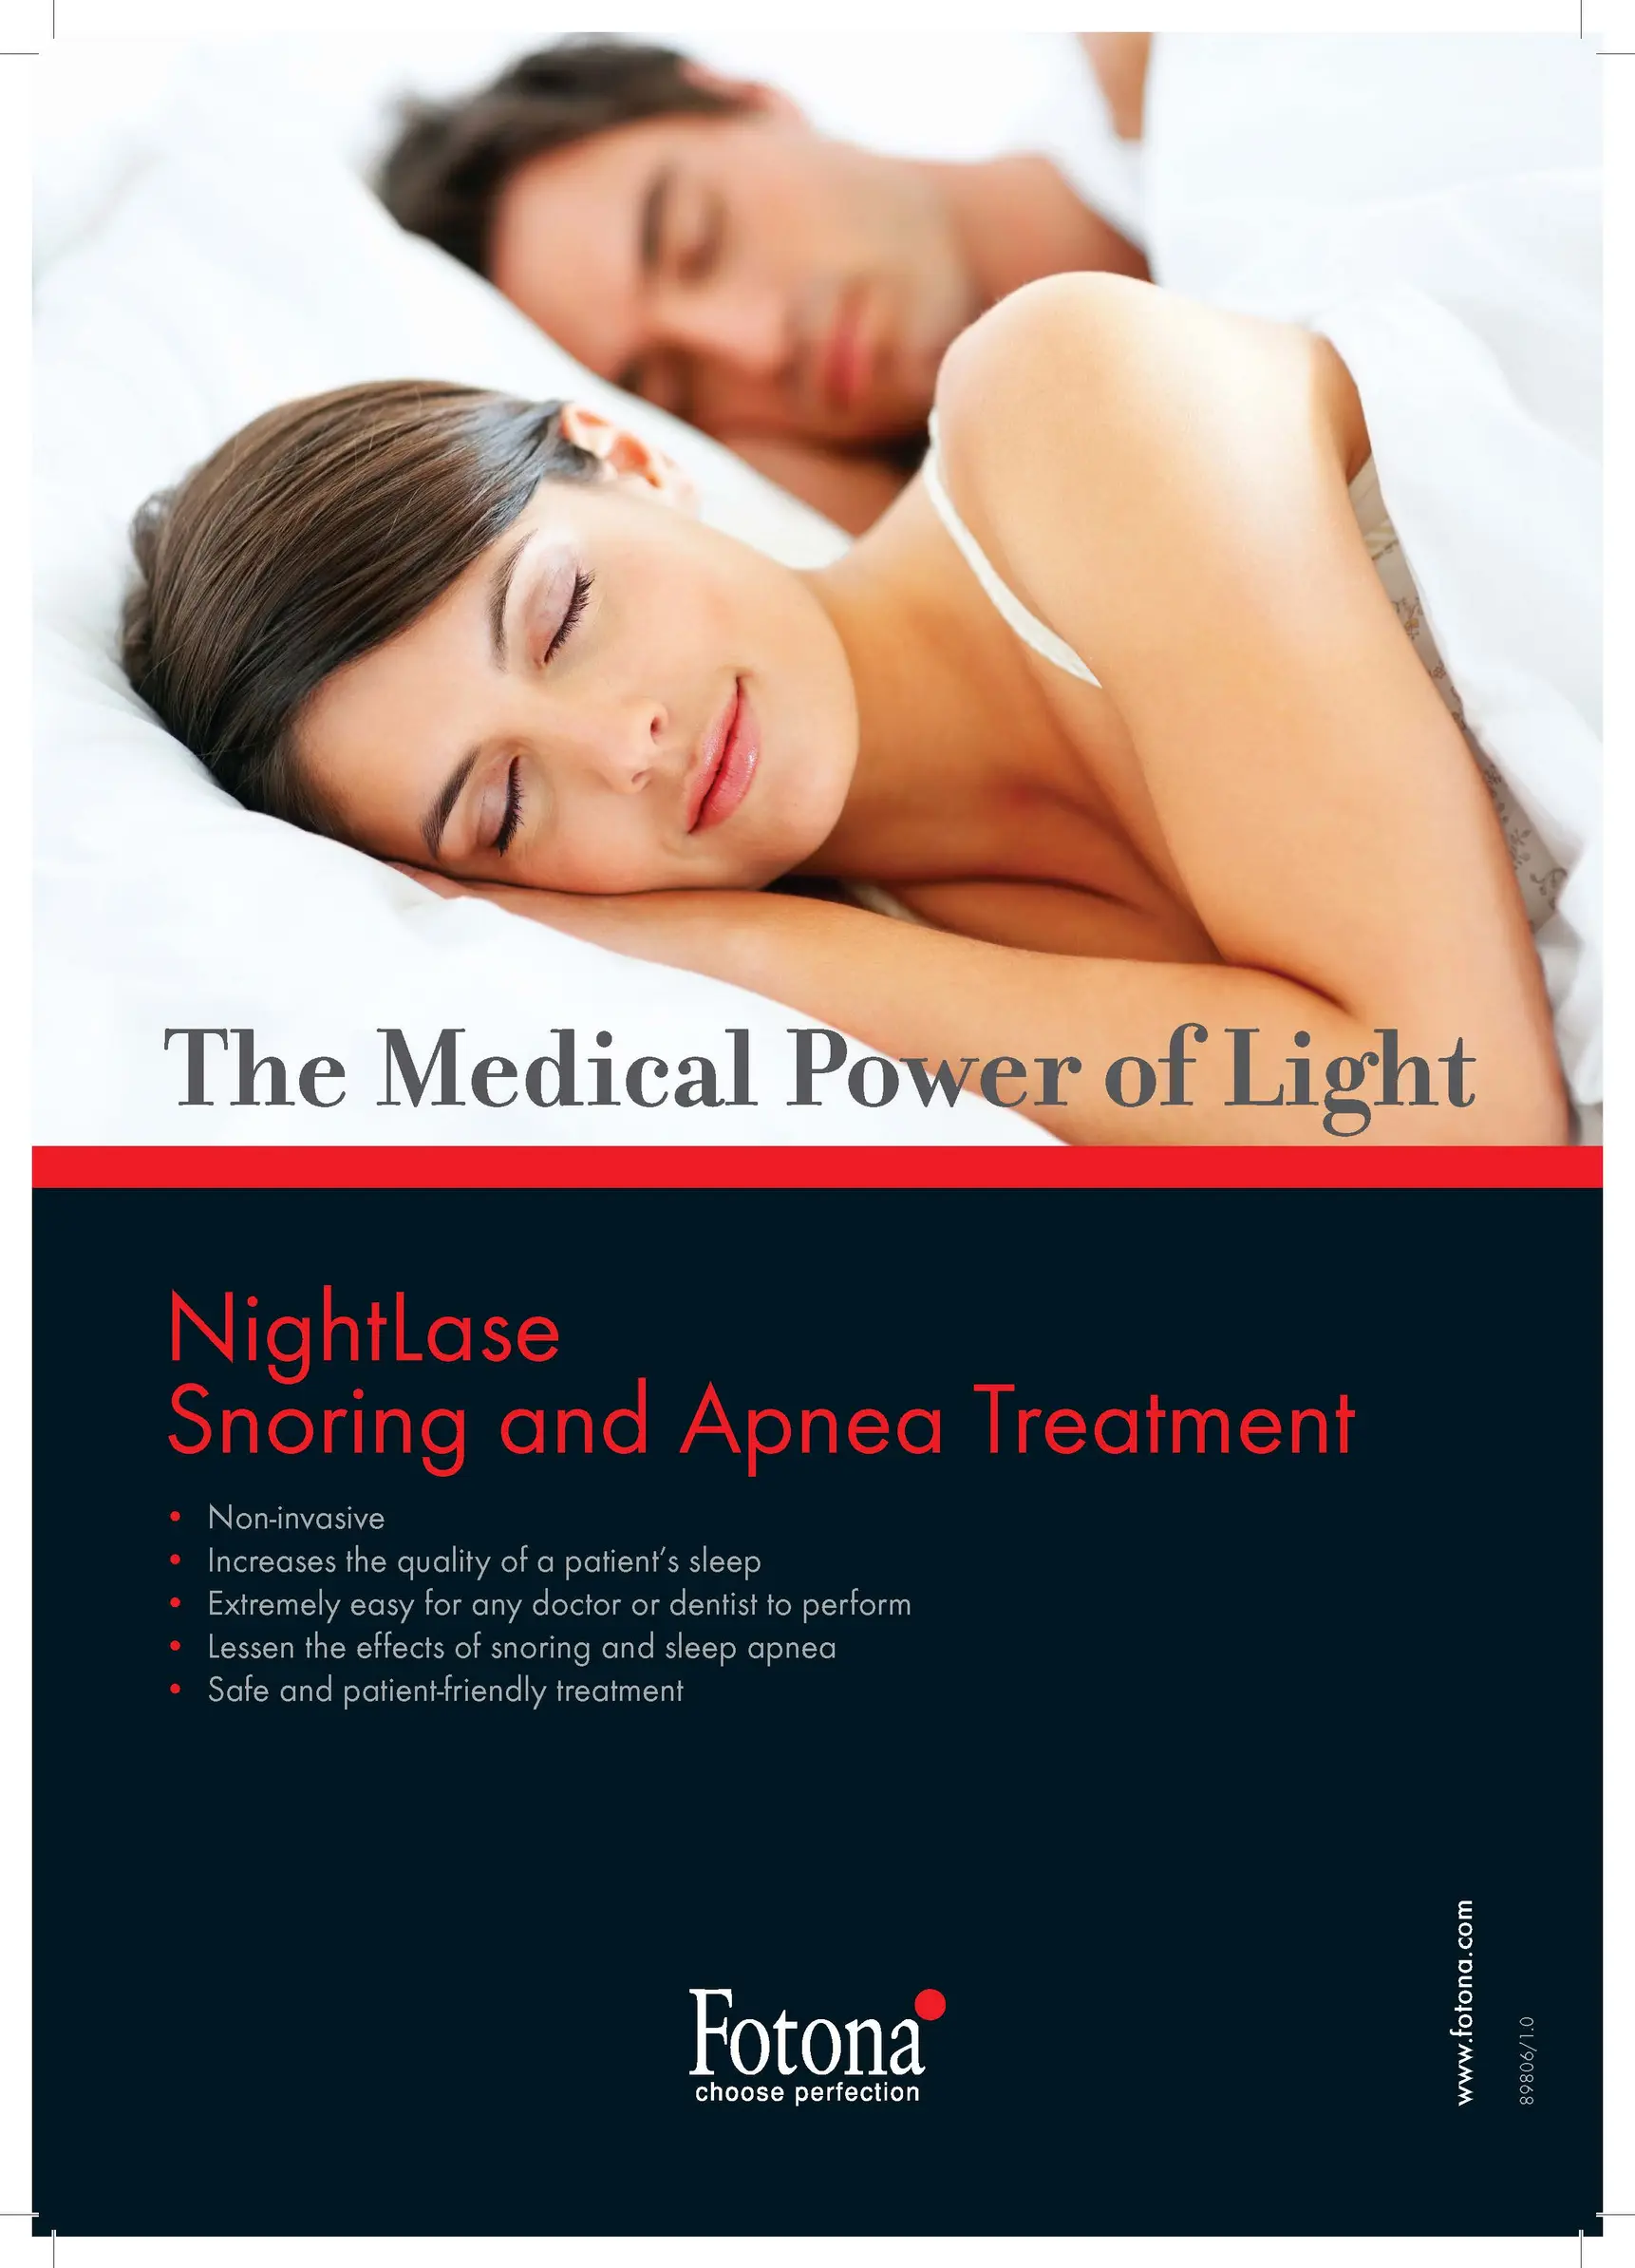 informational page with image of couple sleeping in bed and content about Nightlase snoring treatment Plano, TX dentist